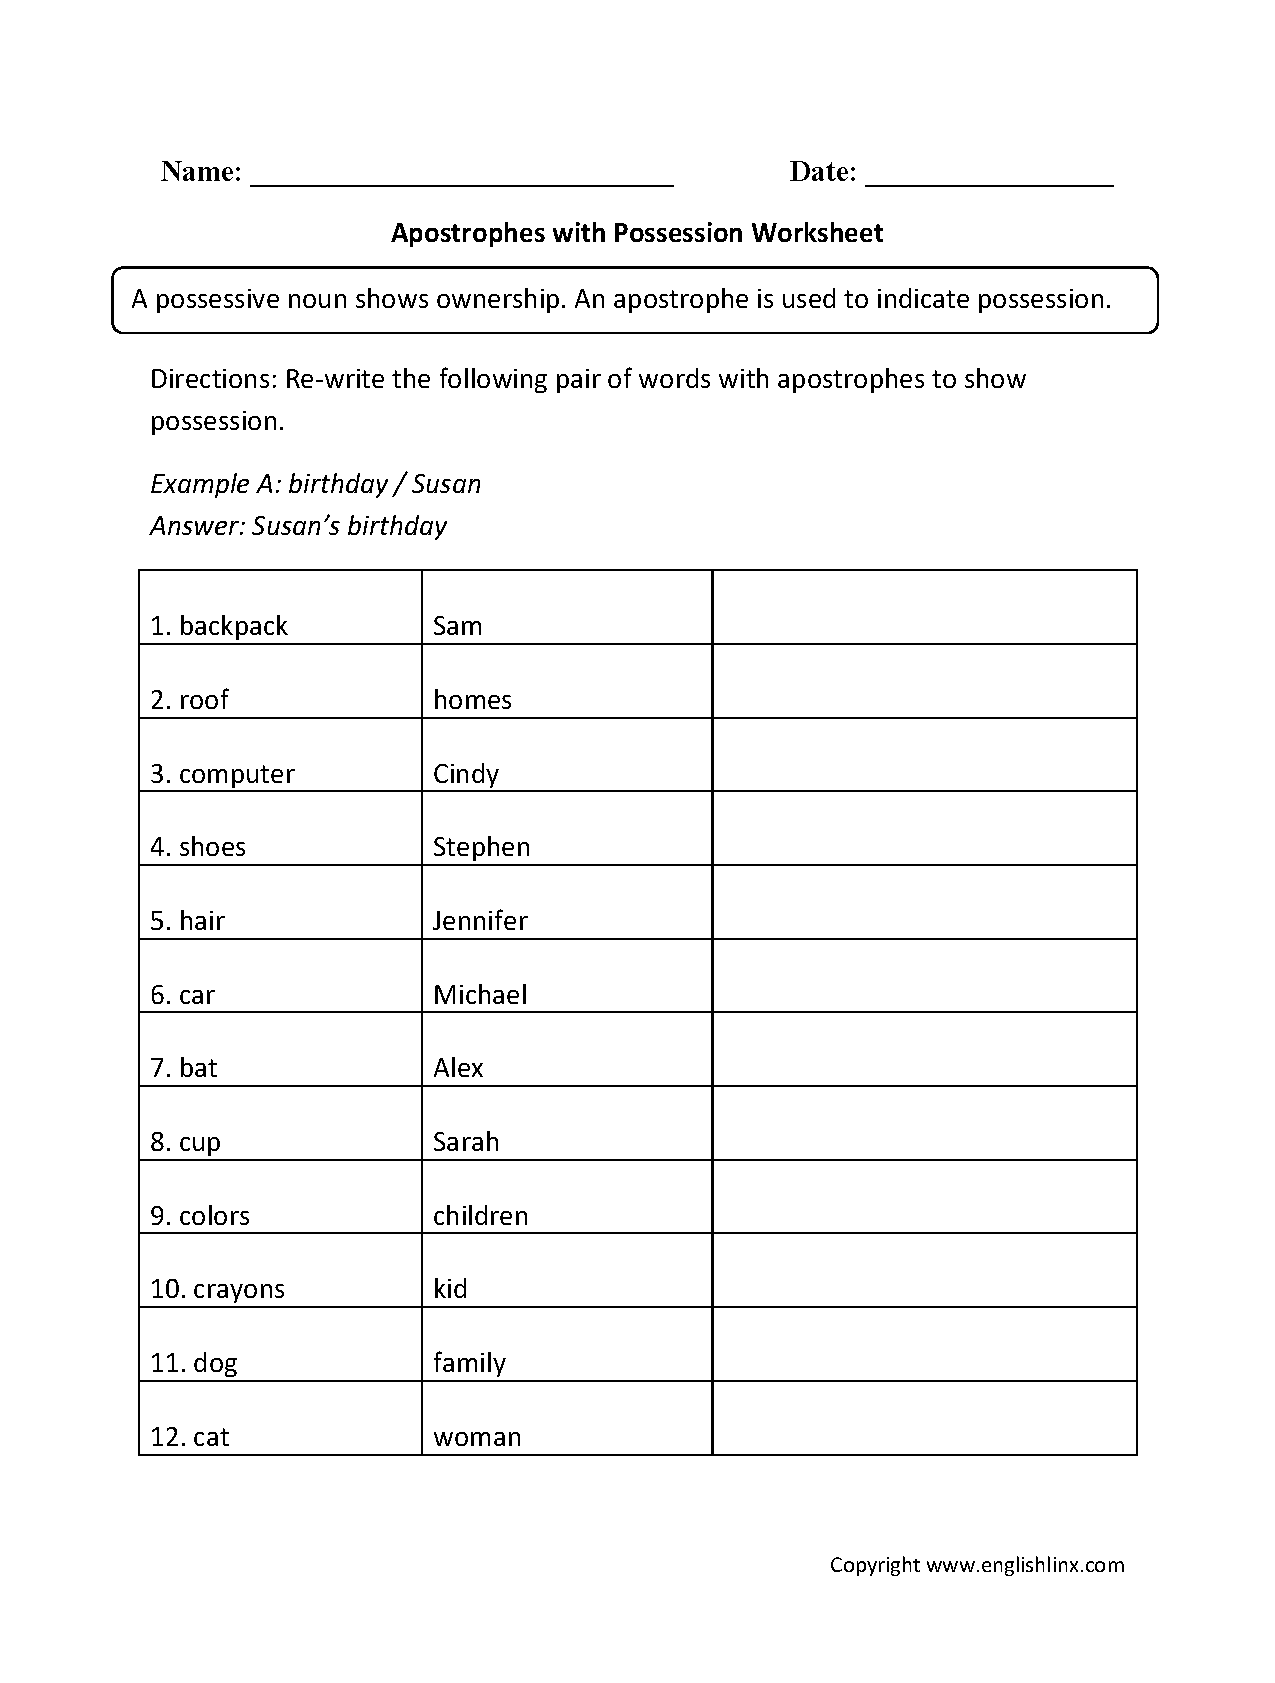 Apostrophes with Possession Worksheets